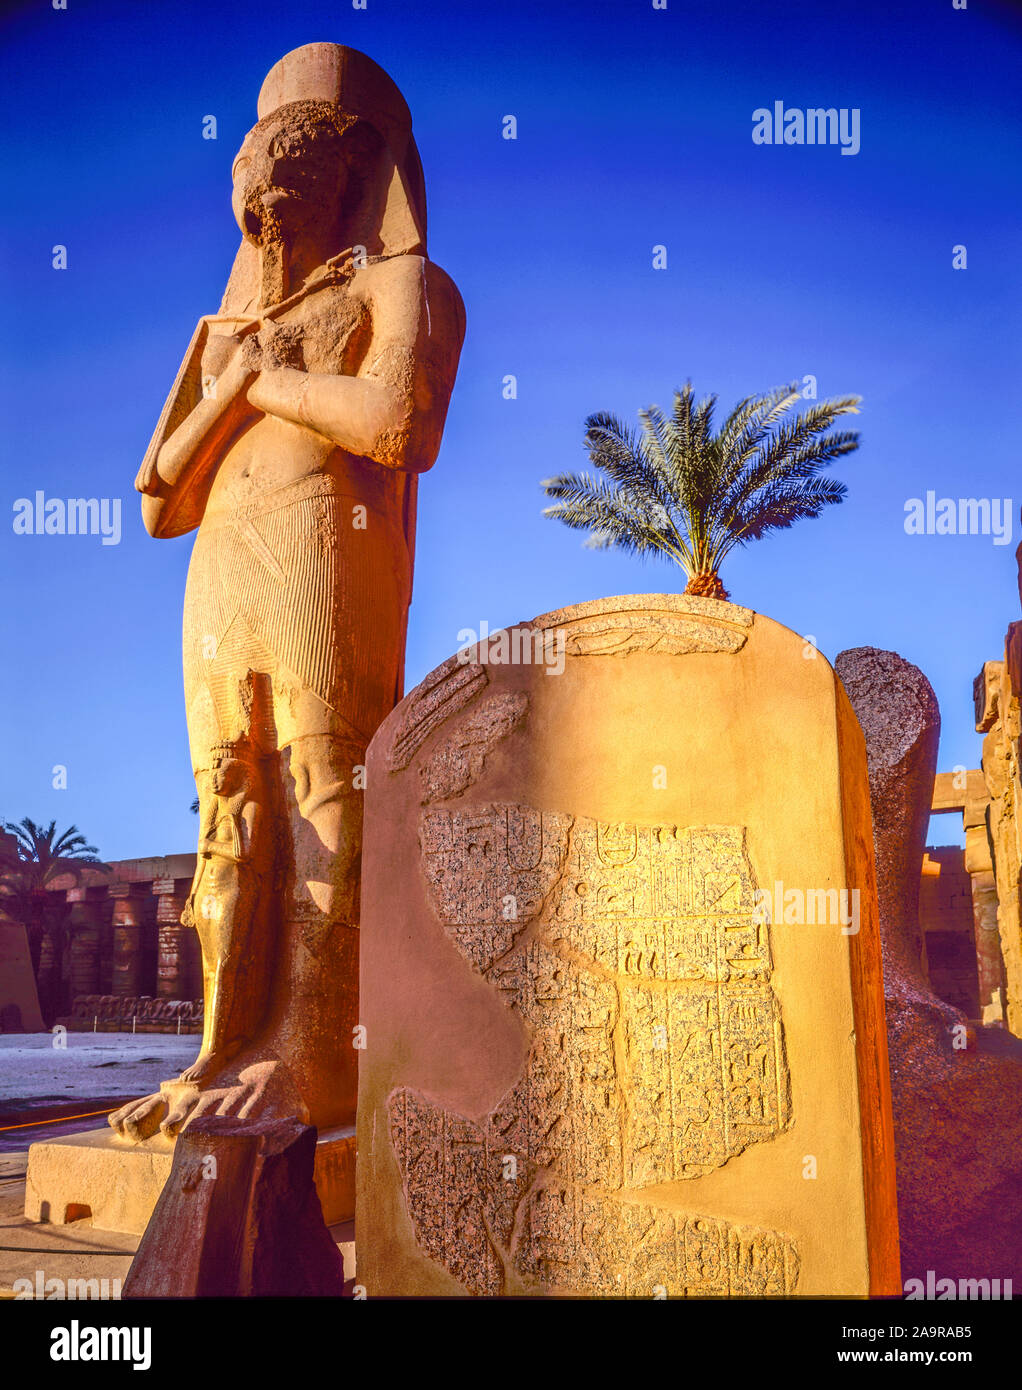 Carvings on Colossi, Luxor Temple at Luxor, Egypt, Ancient city of Thebes, NIle River, Ancient Egyptian Temple, Sahara Desert Stock Photo